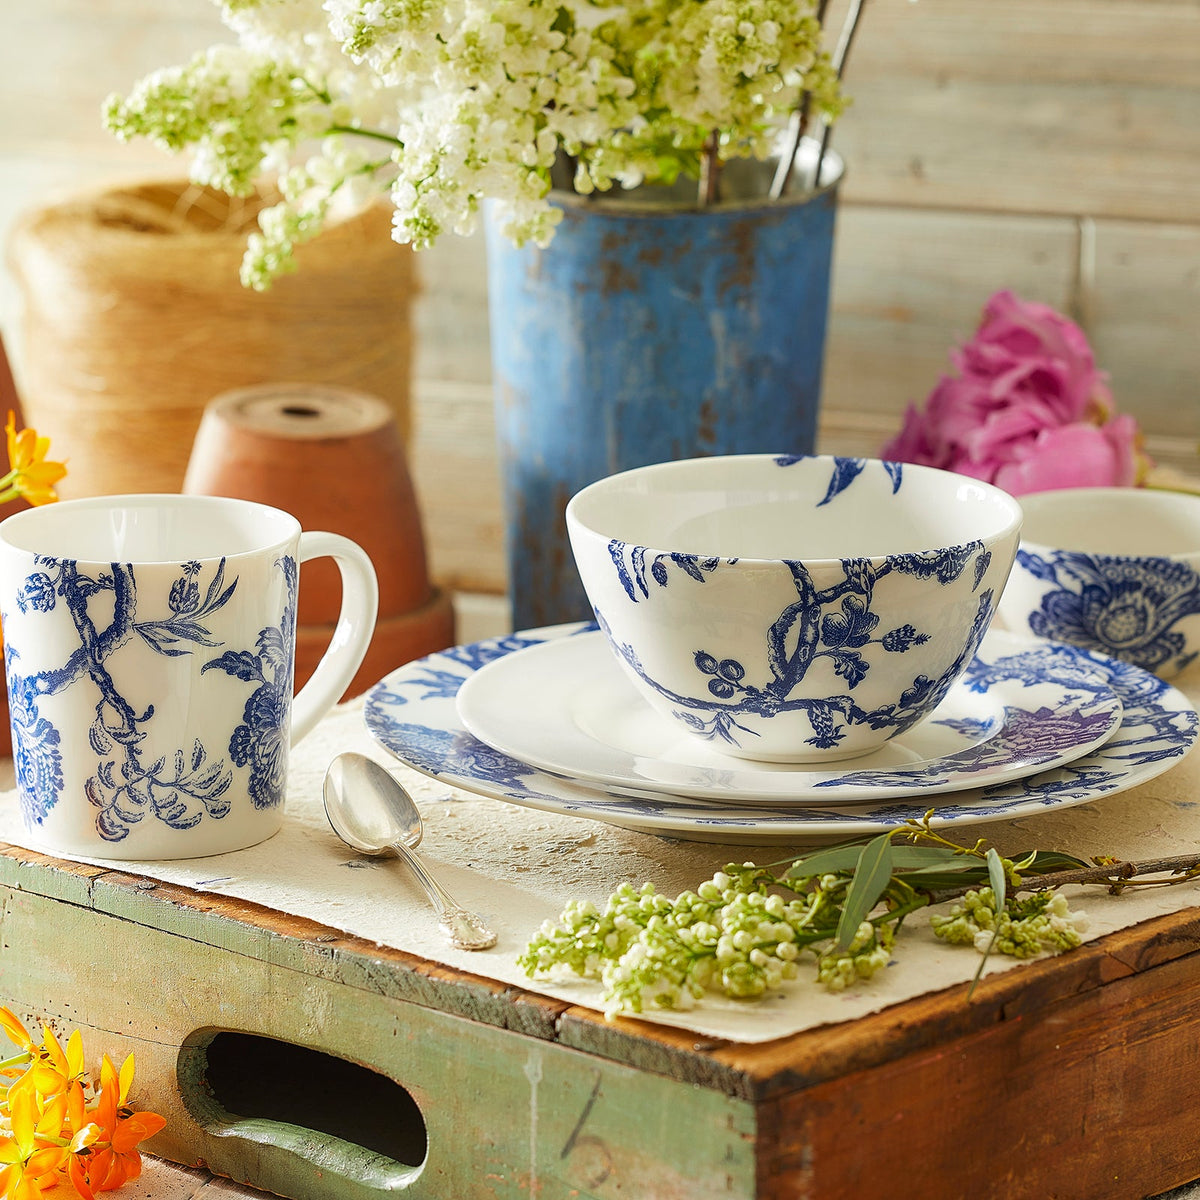 A rustic setting with blue and white Arcadia Rimmed Salad Plate from Caskata Artisanal Home, including a cup, bowl, and plates on a worn wooden box, surrounded by various flowers and a tin vase.